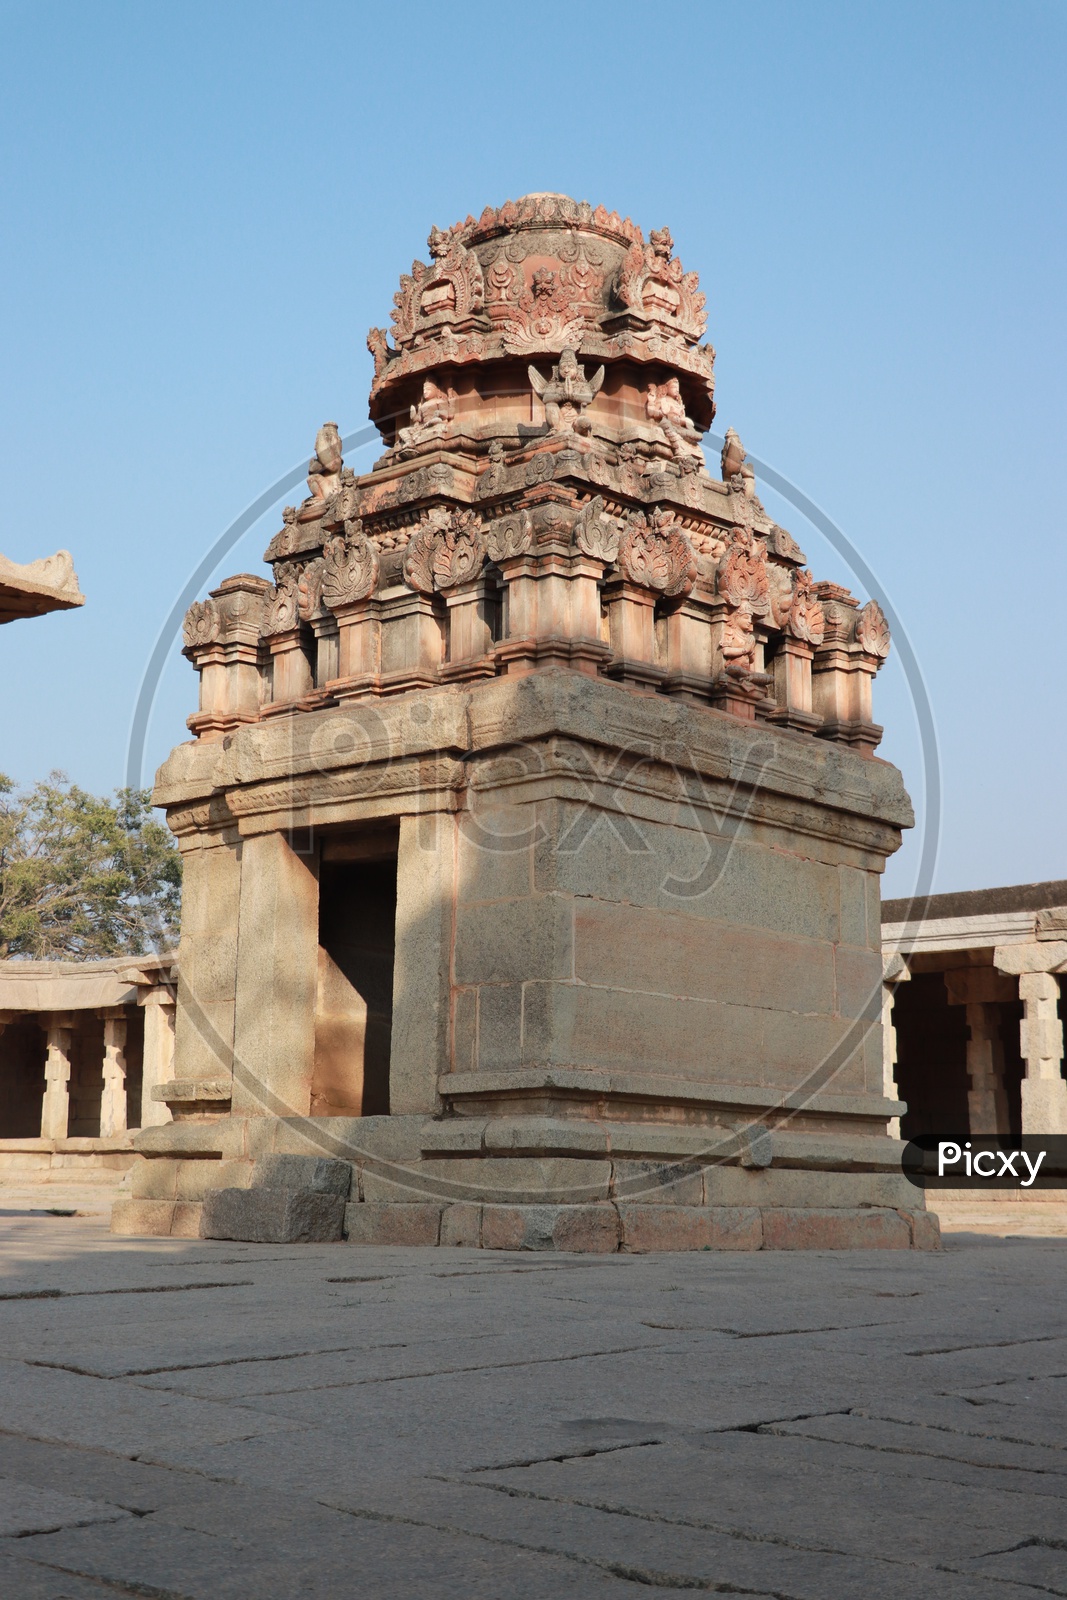 Architecture of a Hindu temple